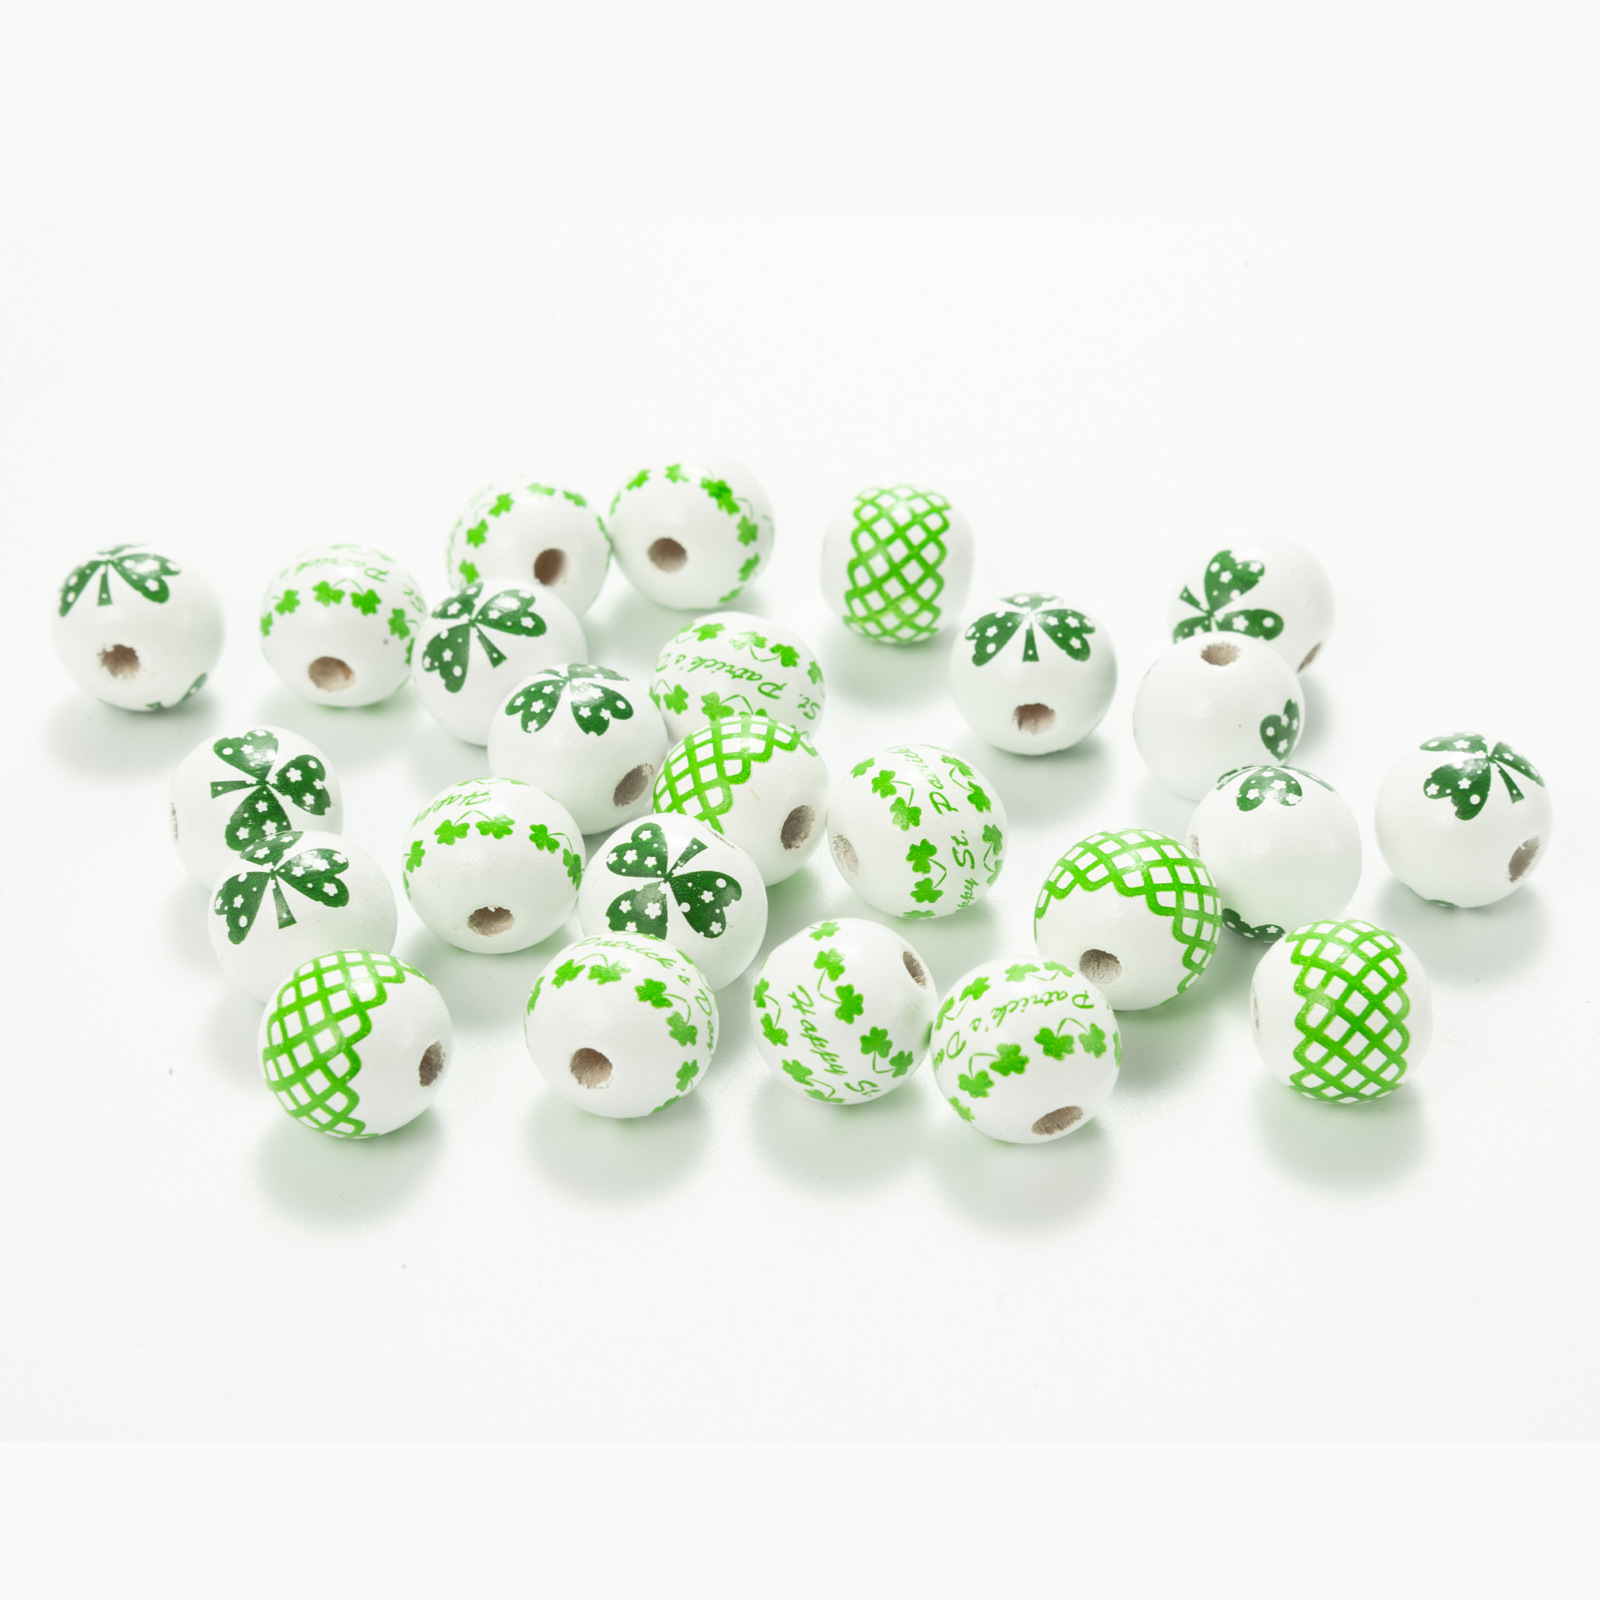 10pcs Irish Festival St. Patrick’s Day Colorful Wooden Beads DIY Accessories